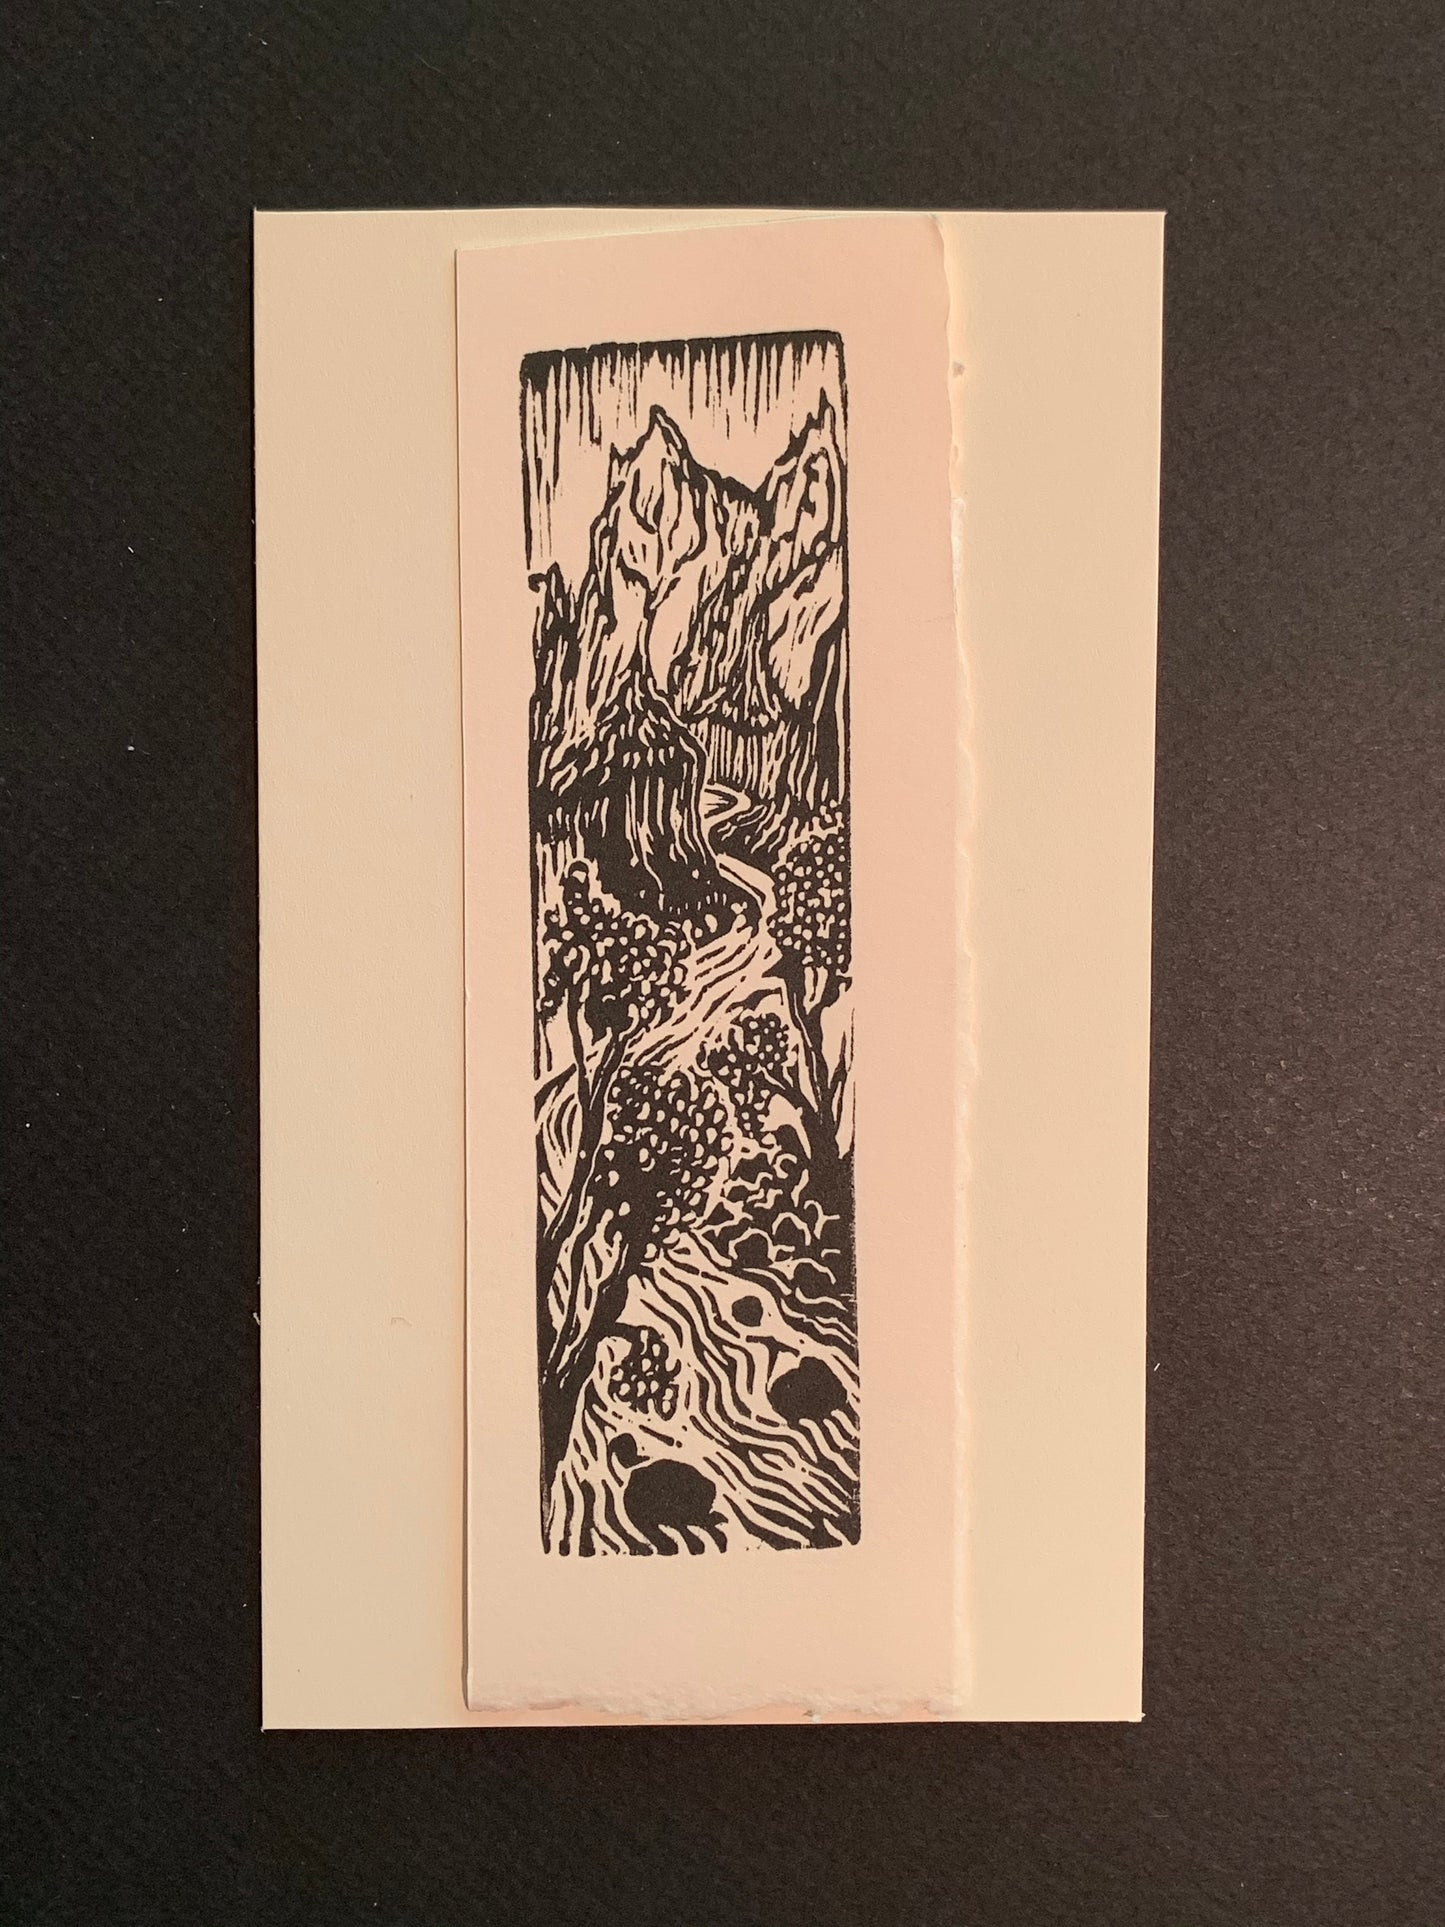 Canyon River Rapids Run original woodcut small print from Water in the Desert